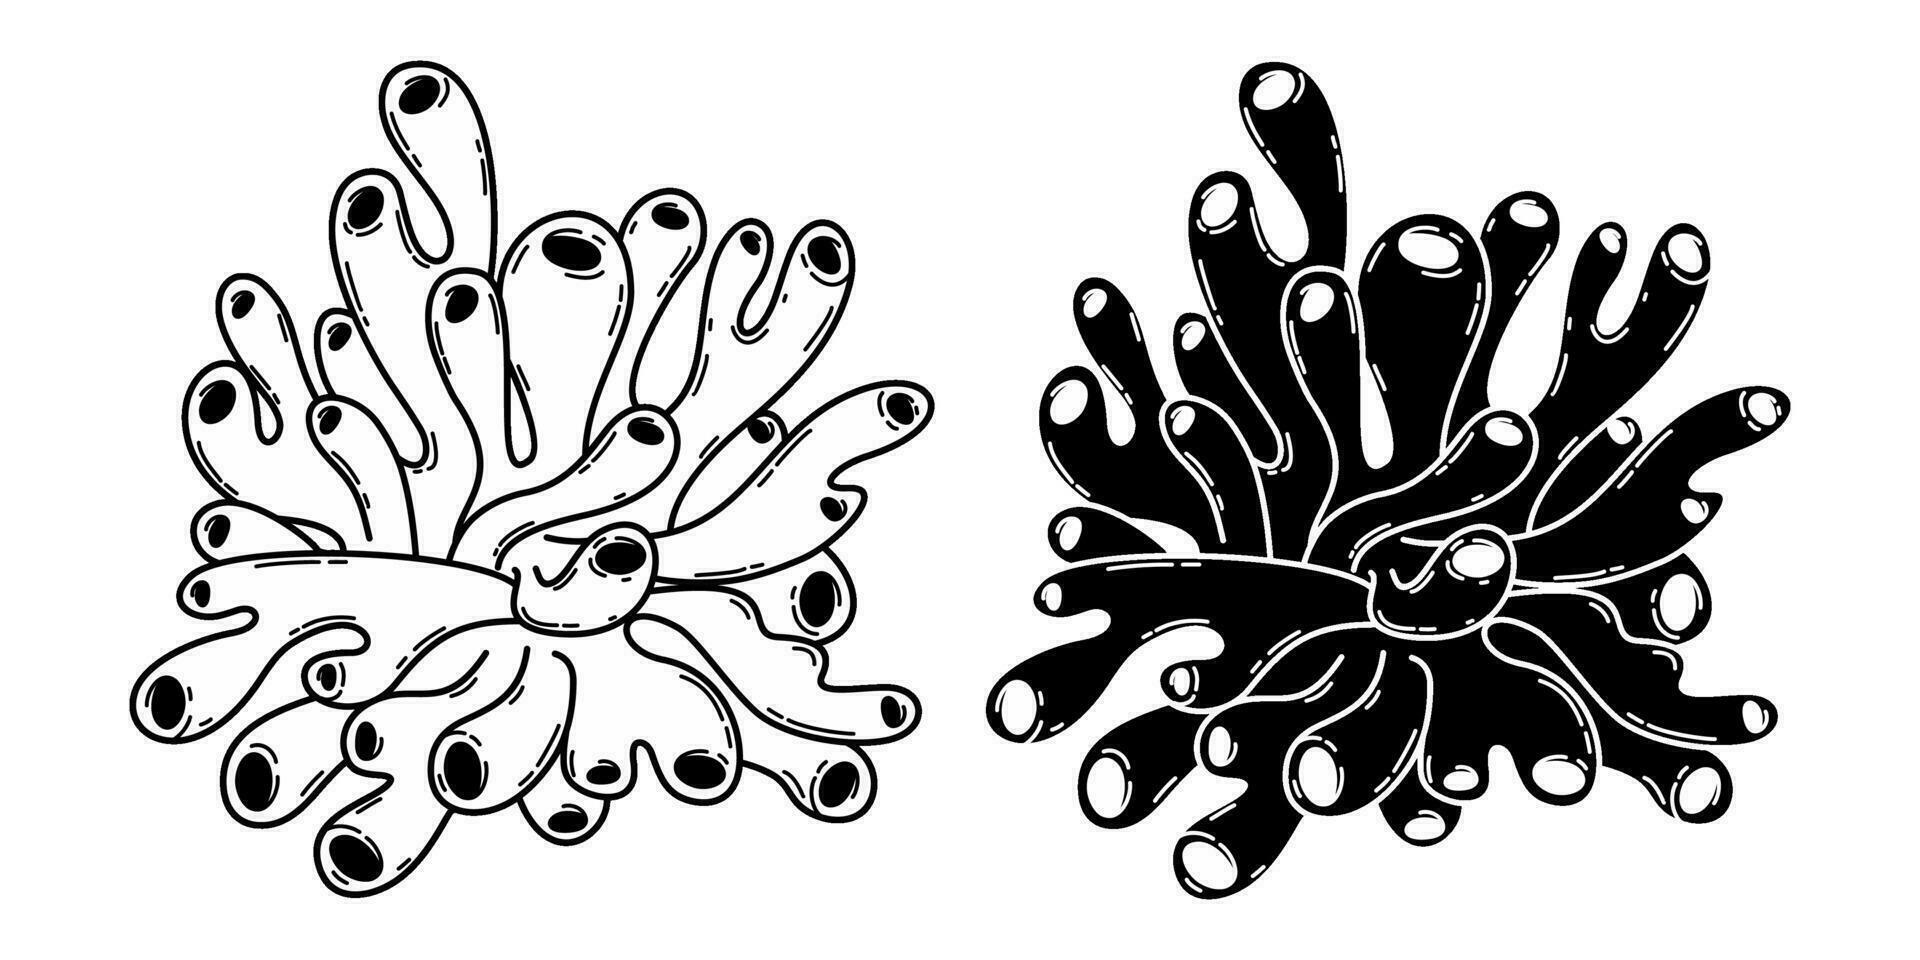 Outline and silhouette of a coral. Sketch sea reef. Underwater ocean creature. Black and white marine illustration isolated on a white background. vector